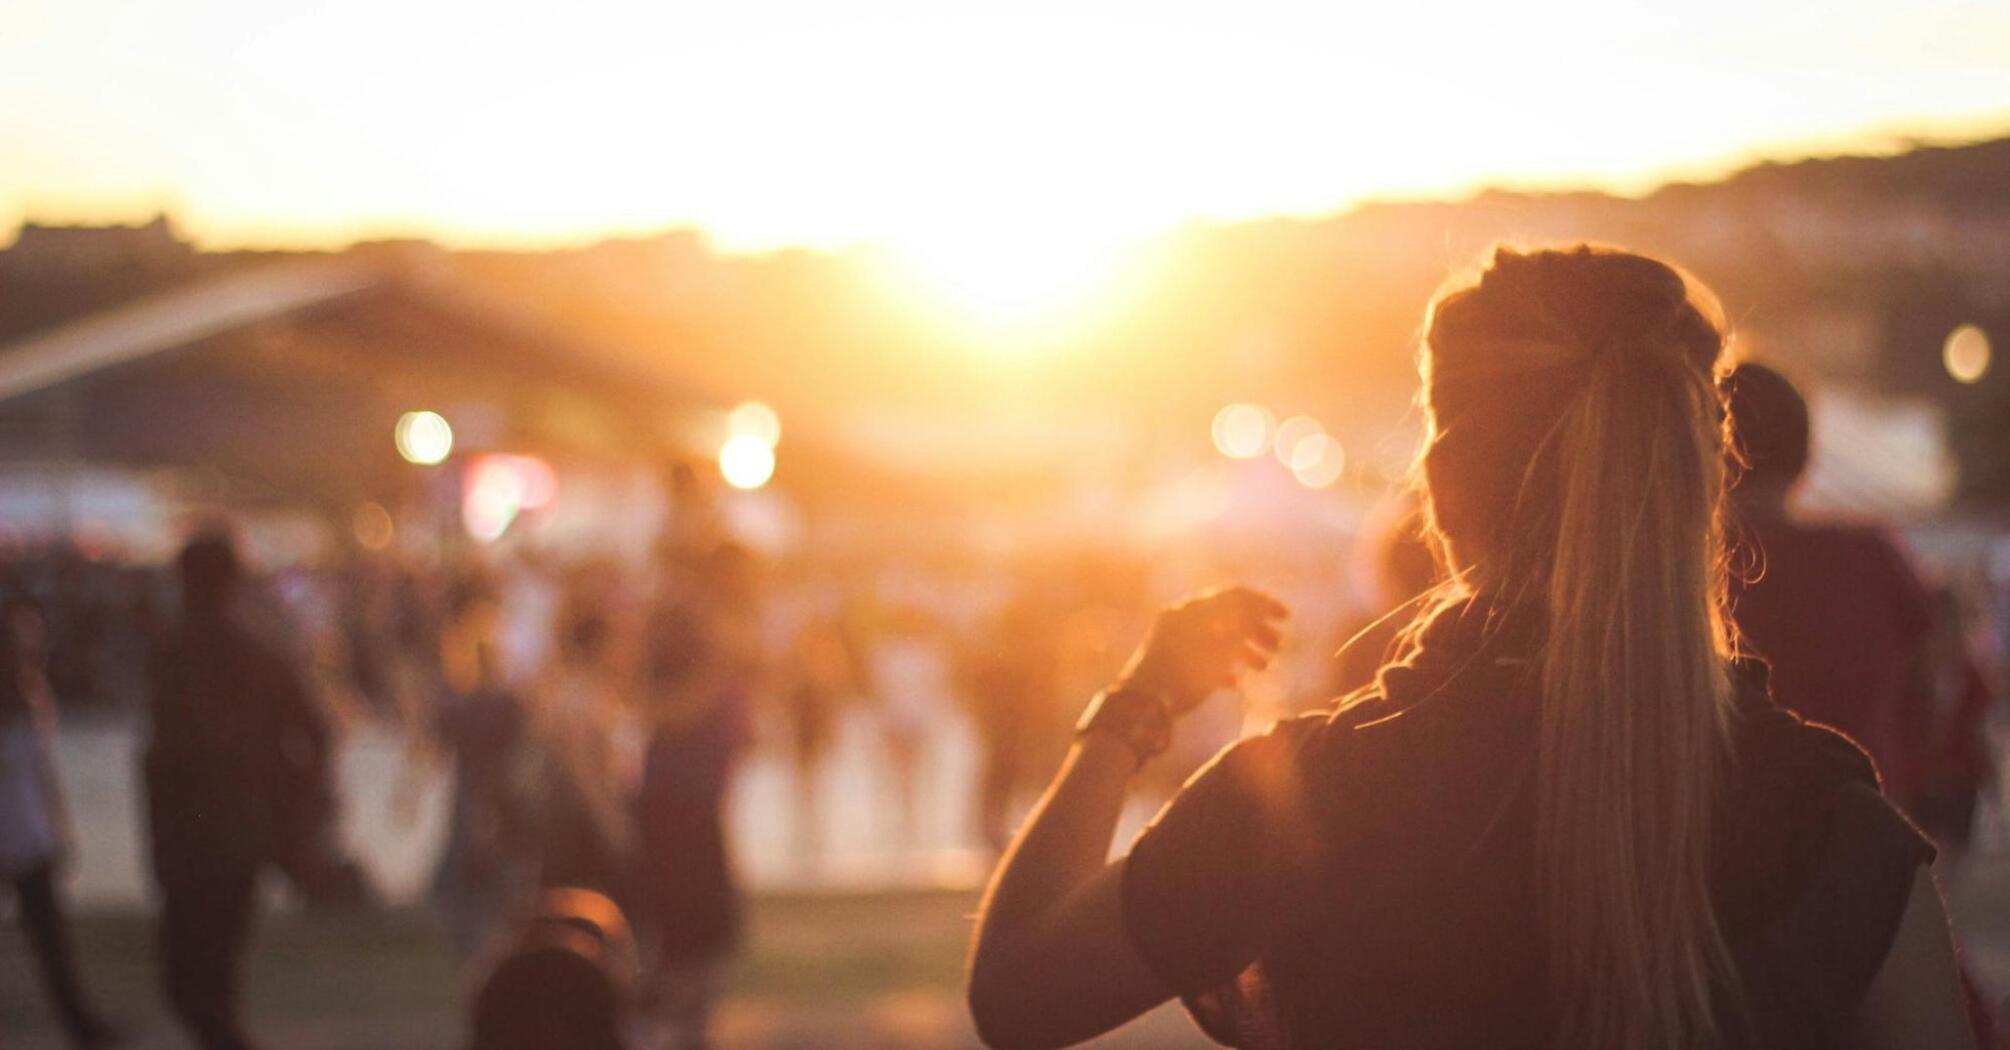 A person enjoying a sunset at a festival